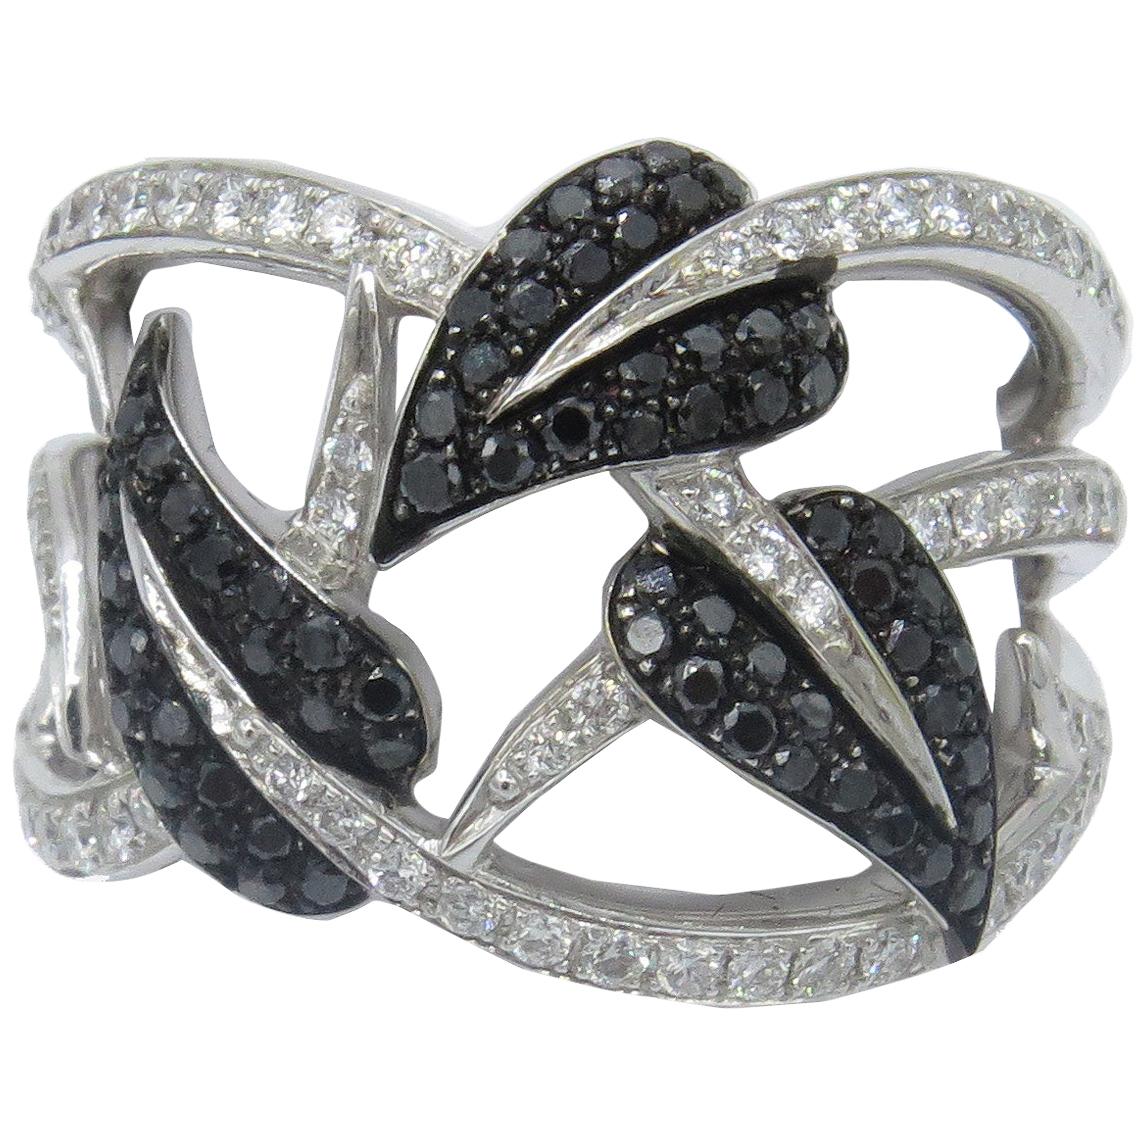 Stephen Webster "Fly By Night" White and Black Diamond 18 Karat Gold Ring